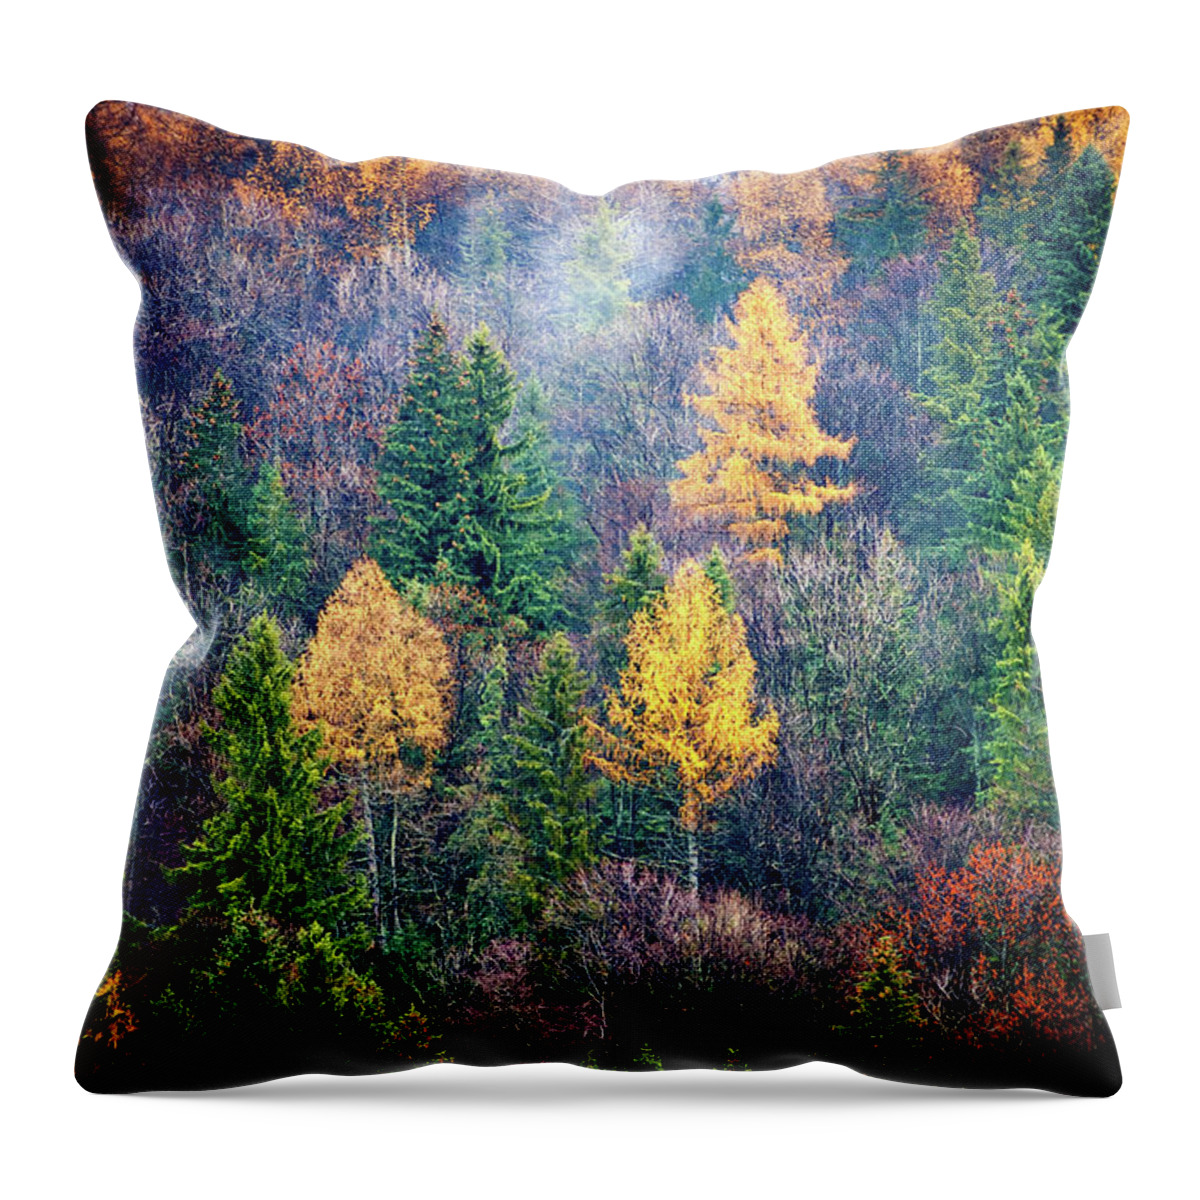 Scenics Throw Pillow featuring the photograph Painted By Light by Michal Sleczek